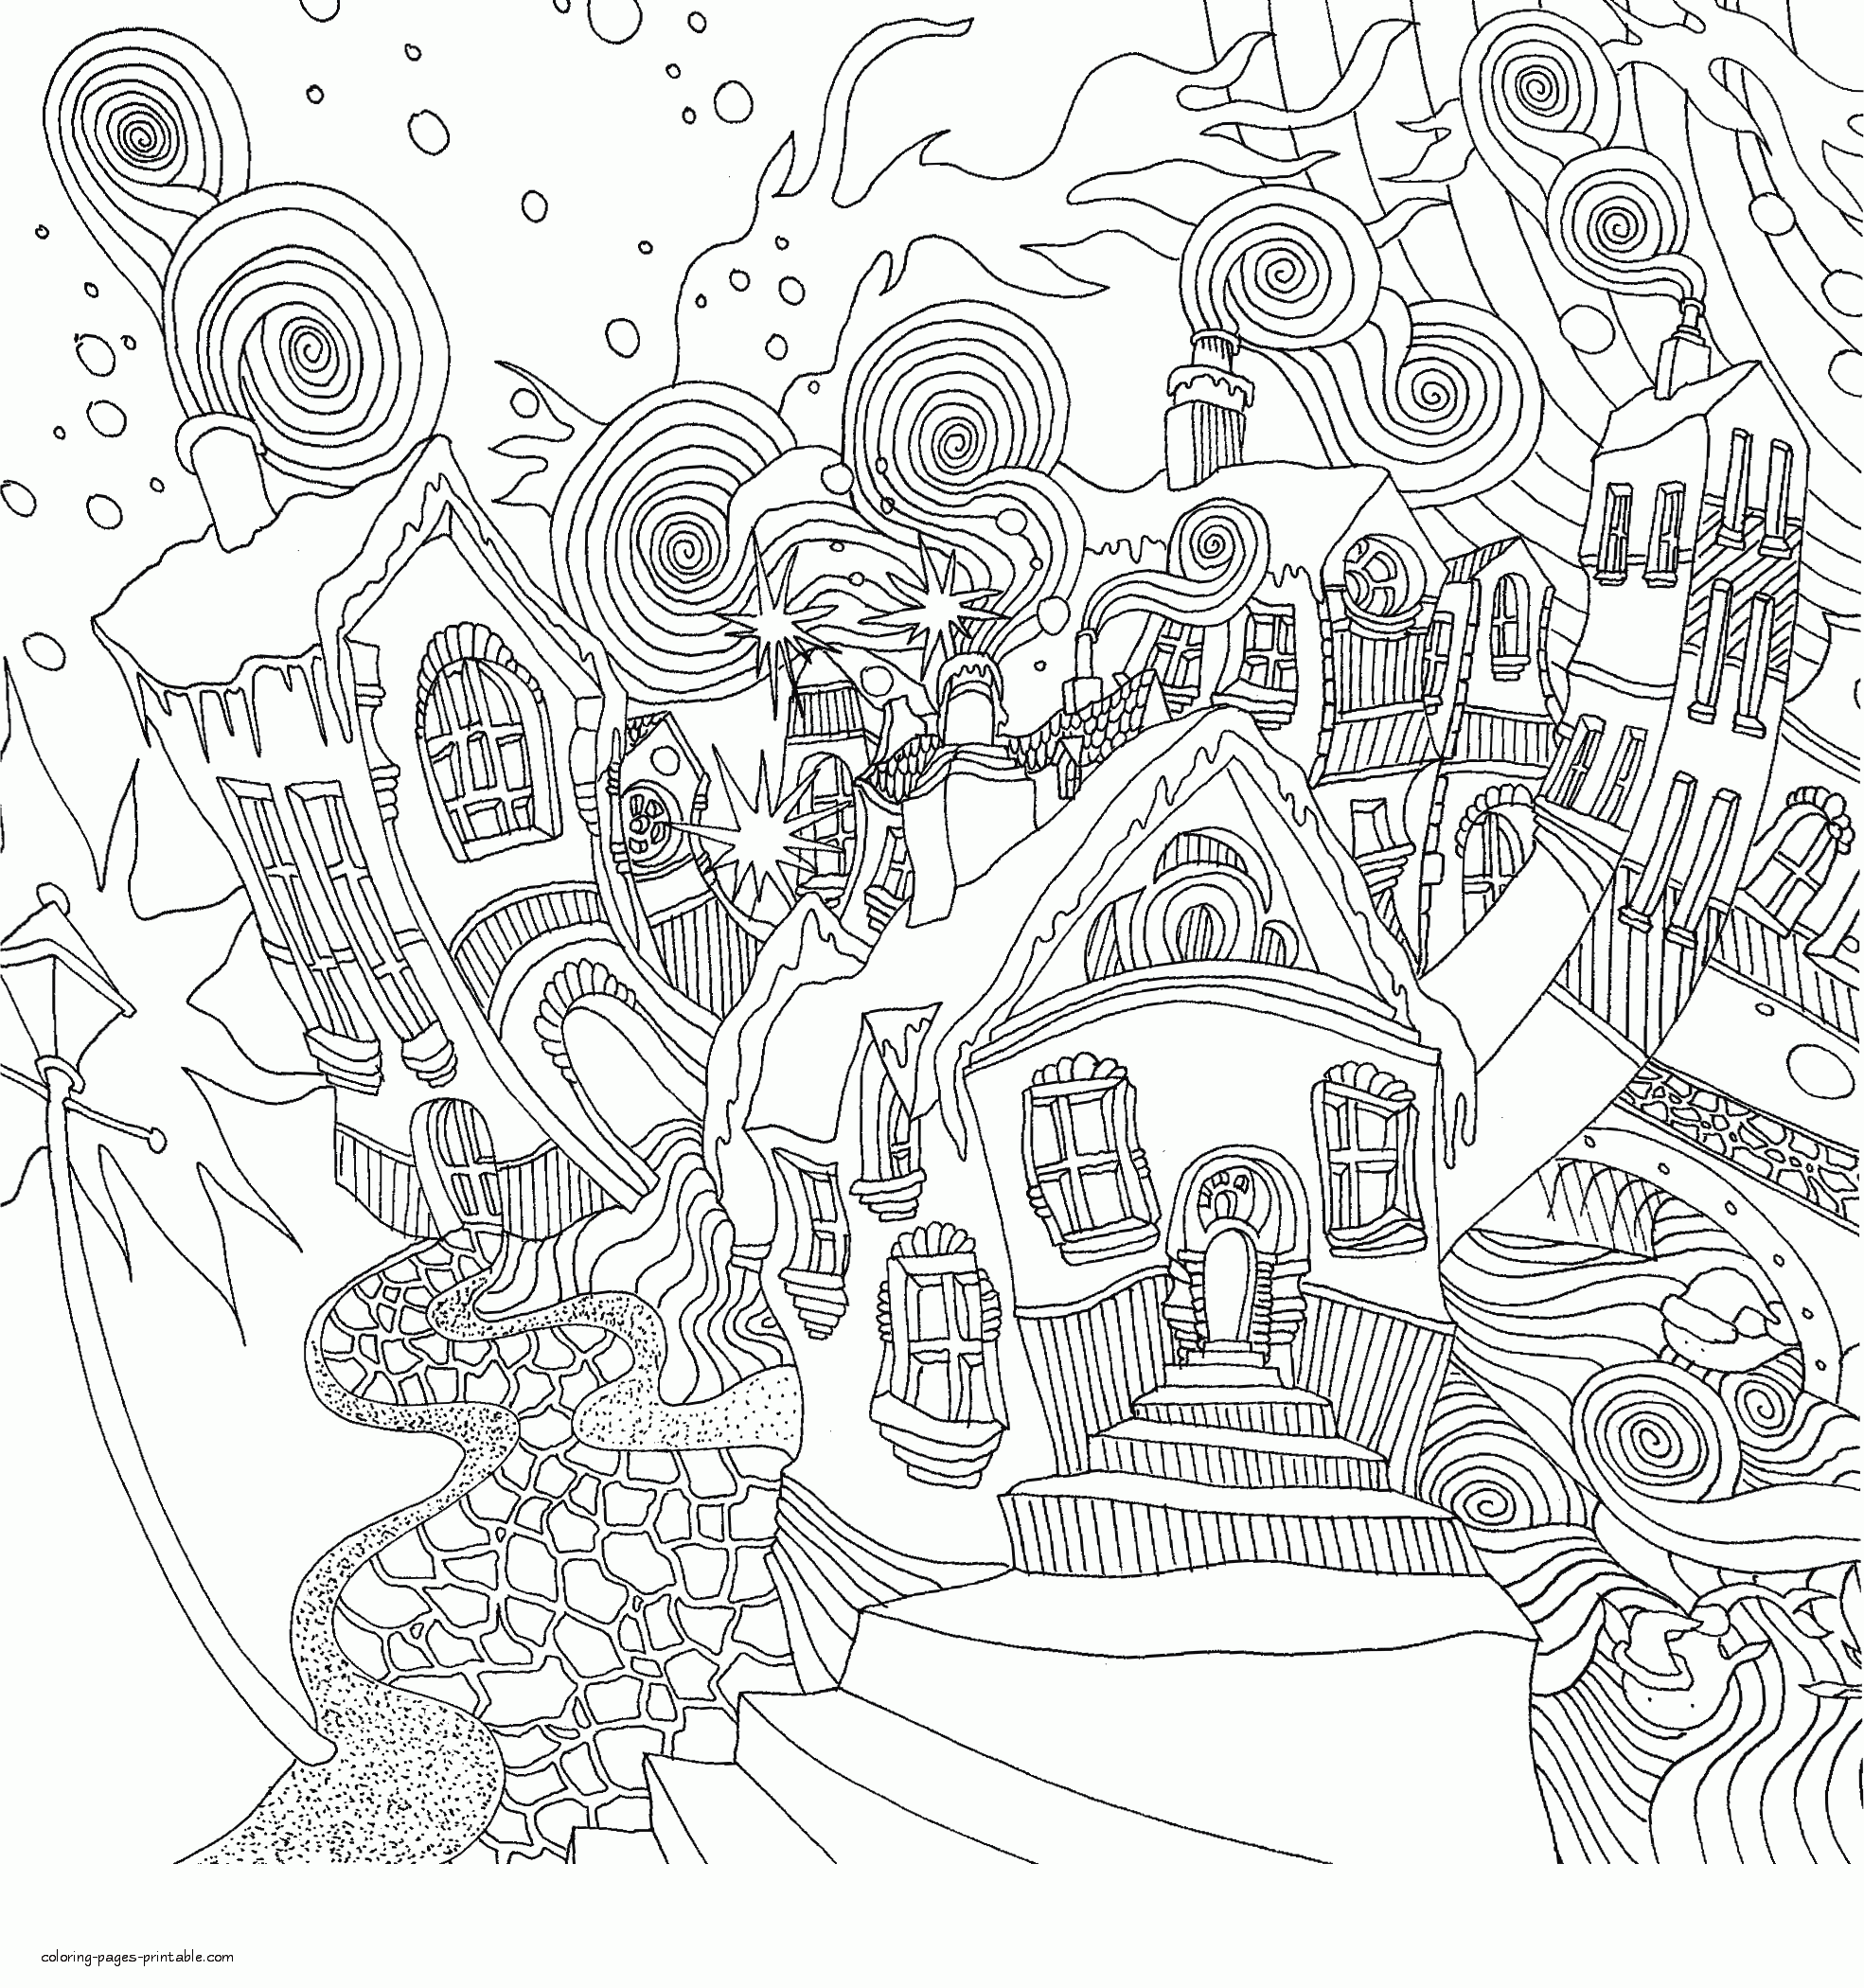 Free Christmas Coloring Pages For Adults || COLORING-PAGES-PRINTABLE.COM